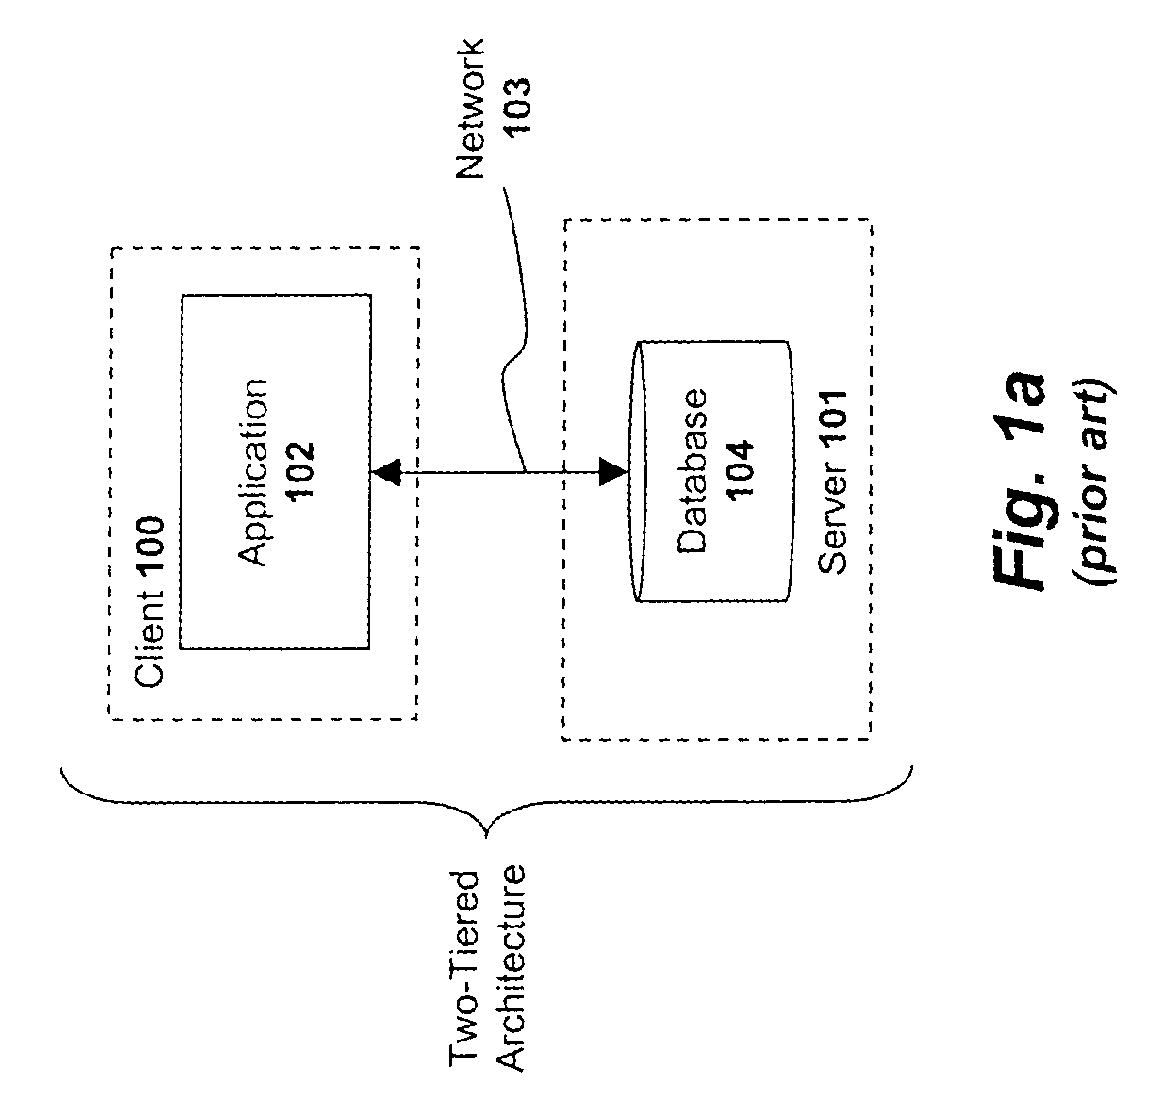 System and method for managing multiple server node clusters using a hierarchical configuration data structure